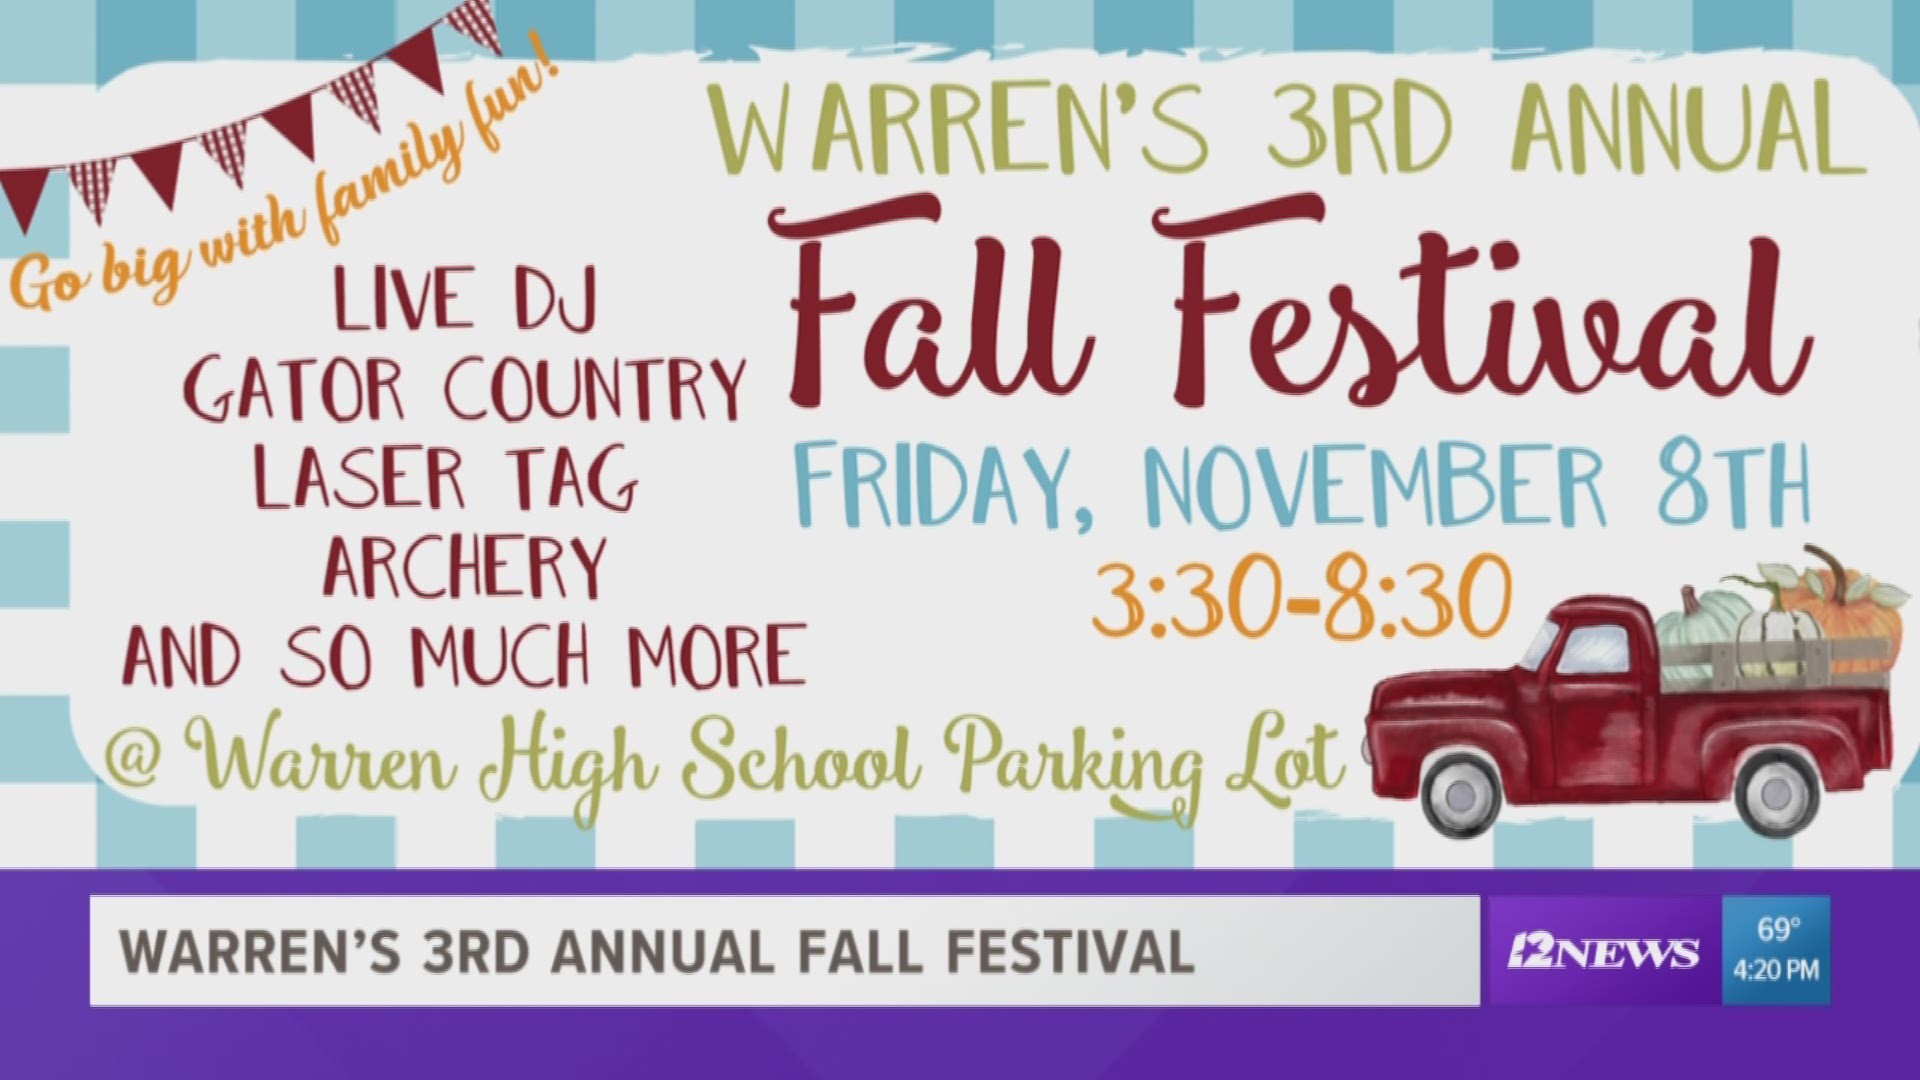 The festival will be Friday, November 8 from 3:30 p.m. to 8:30 p.m. in the high school parking lot.